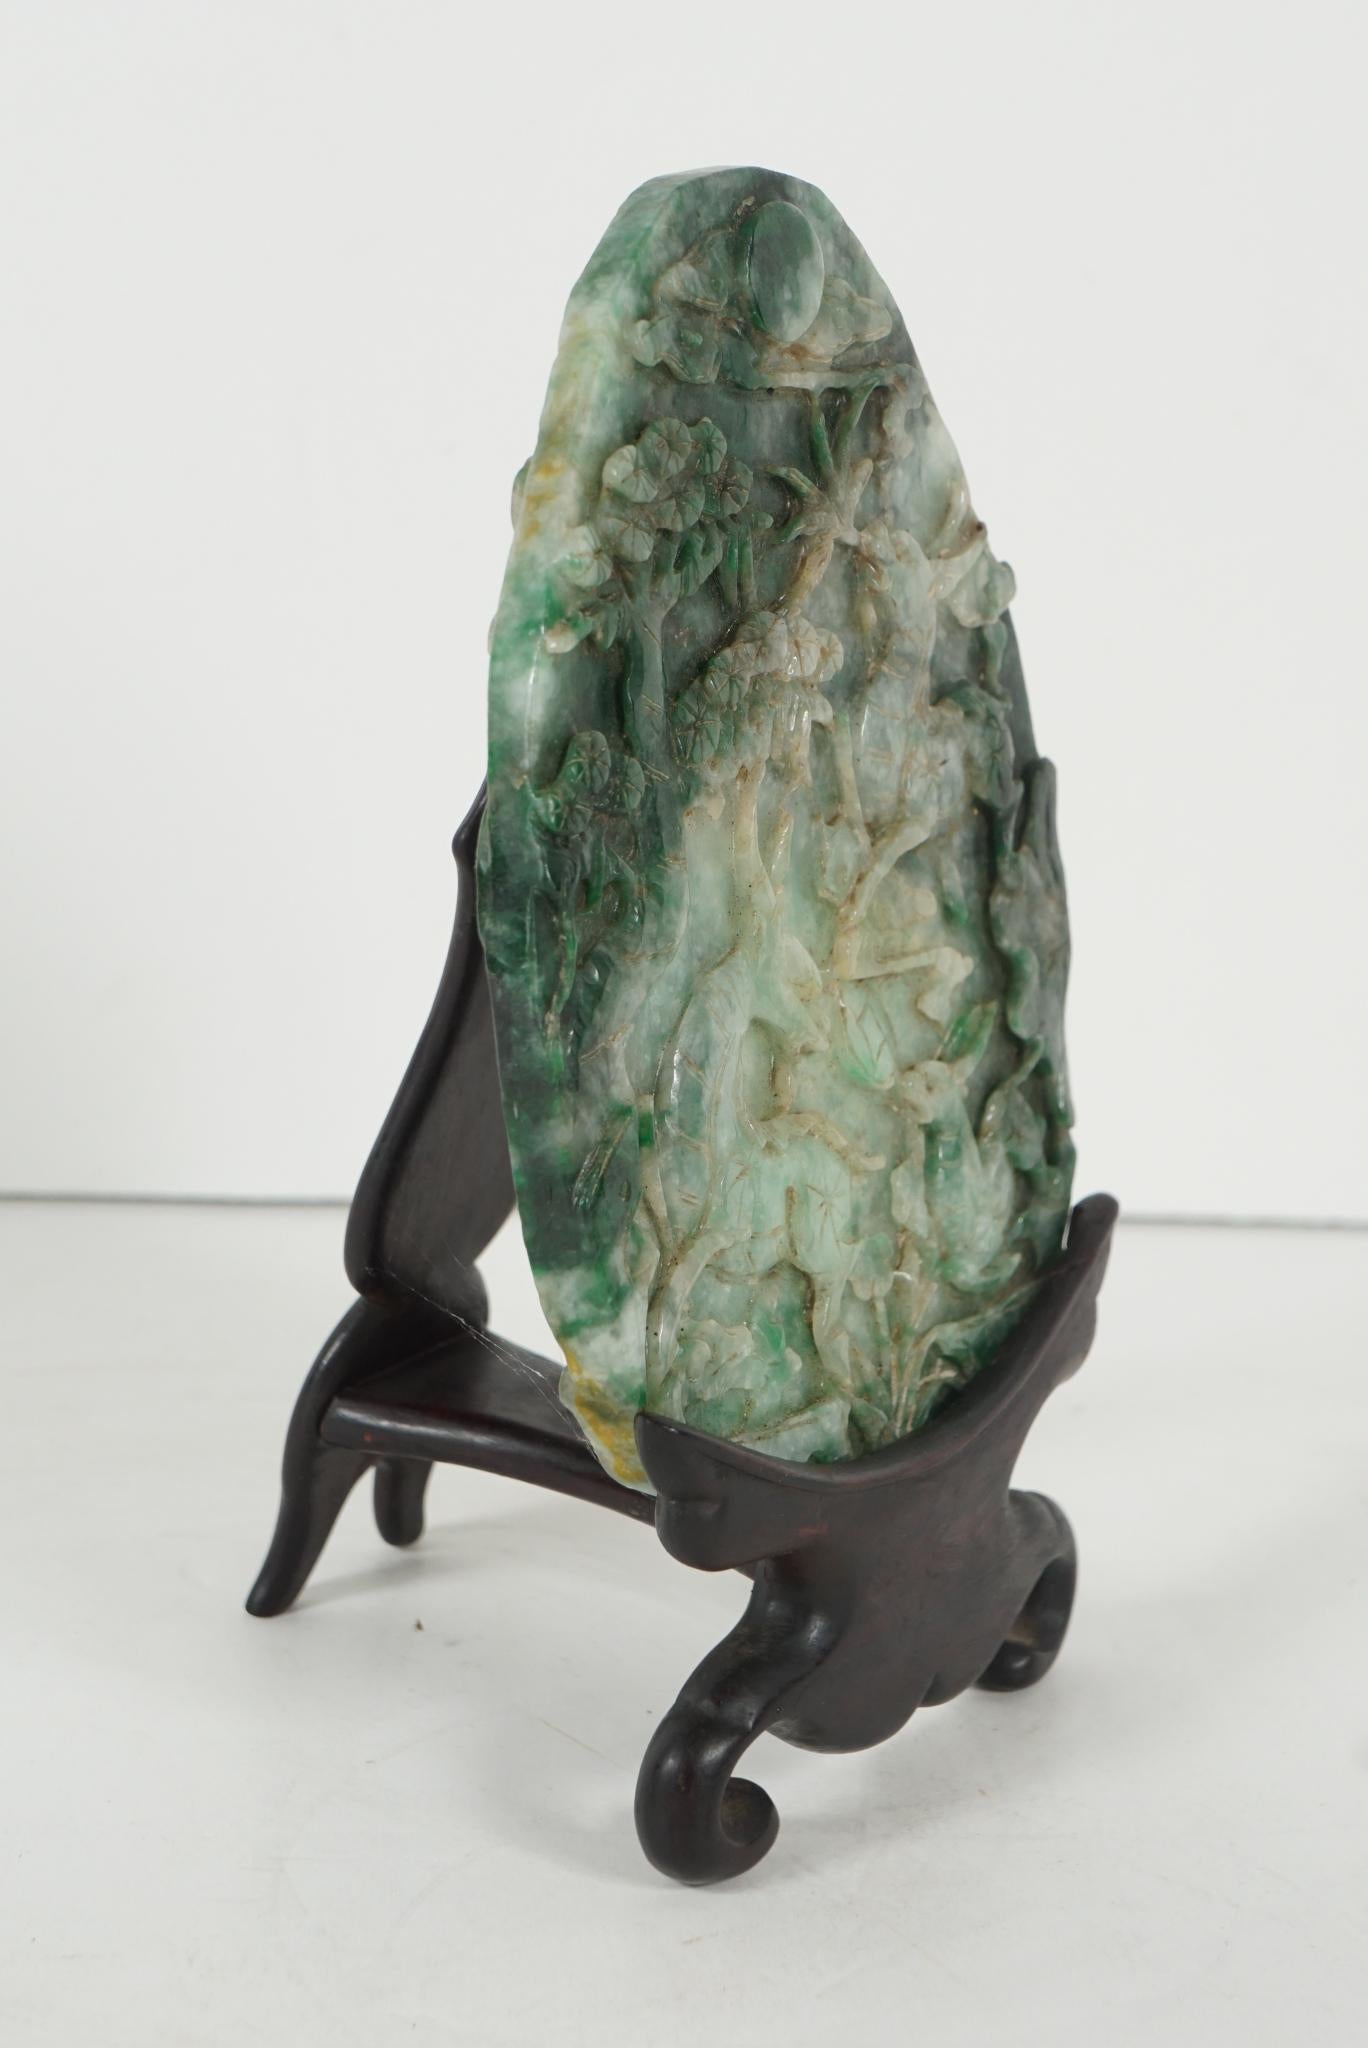 This very nice carved plaque of good size comes from China and was made circa 1900. The stone is a rich combination of dark, light and emerald green. Sliced from a boulder washed and tumbled in a river the plaque is carved to both sides and rests